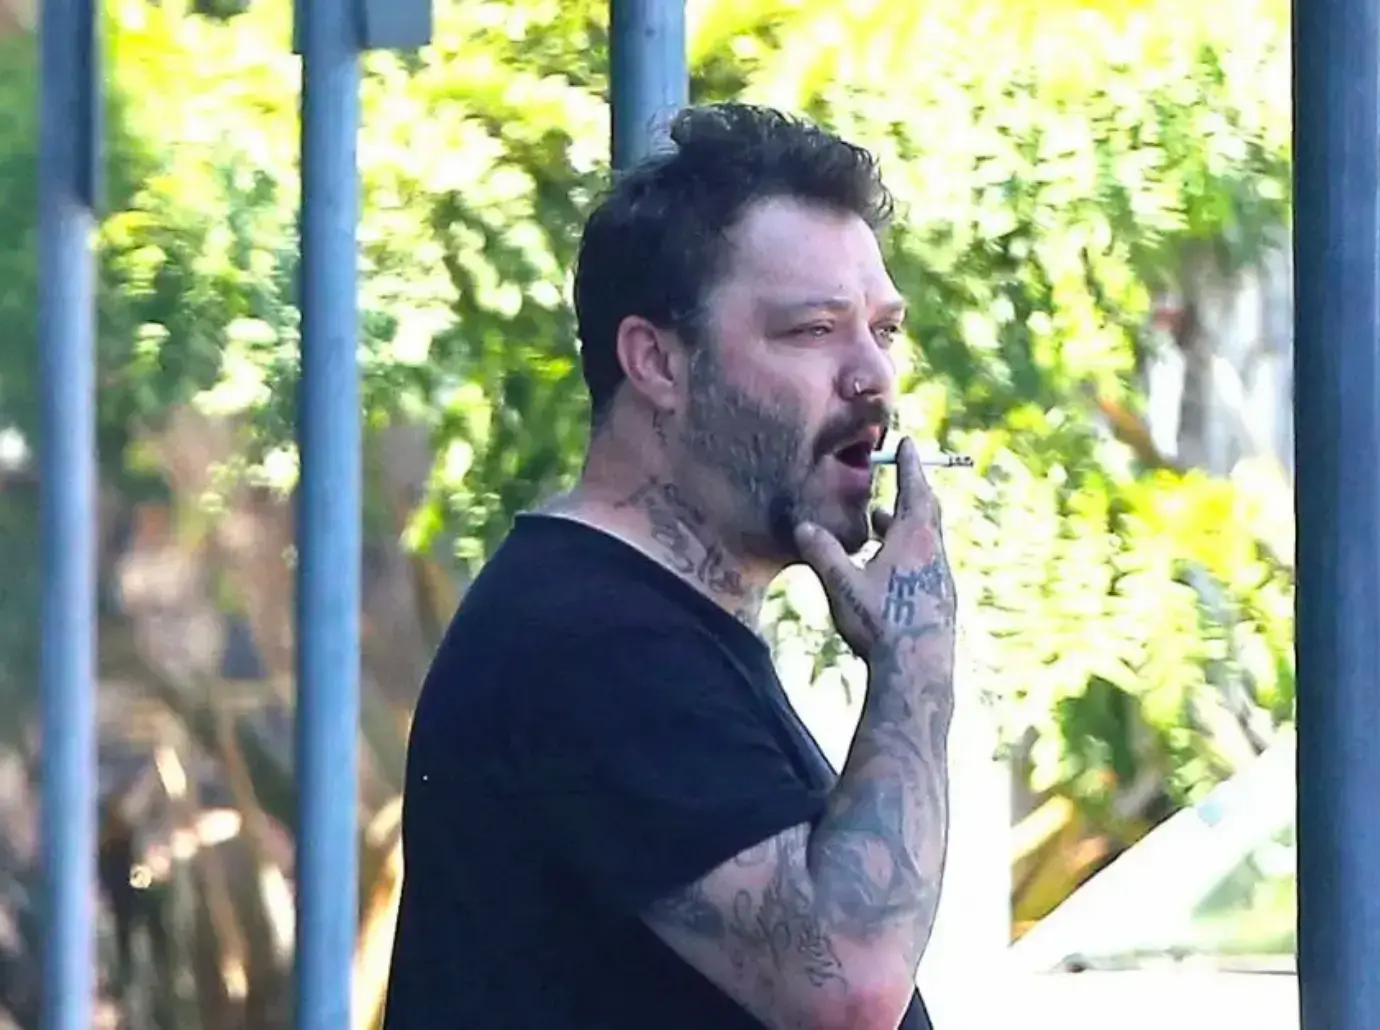 Bam Margera Threatened To Kill Man With Brass Knuckles Report photo